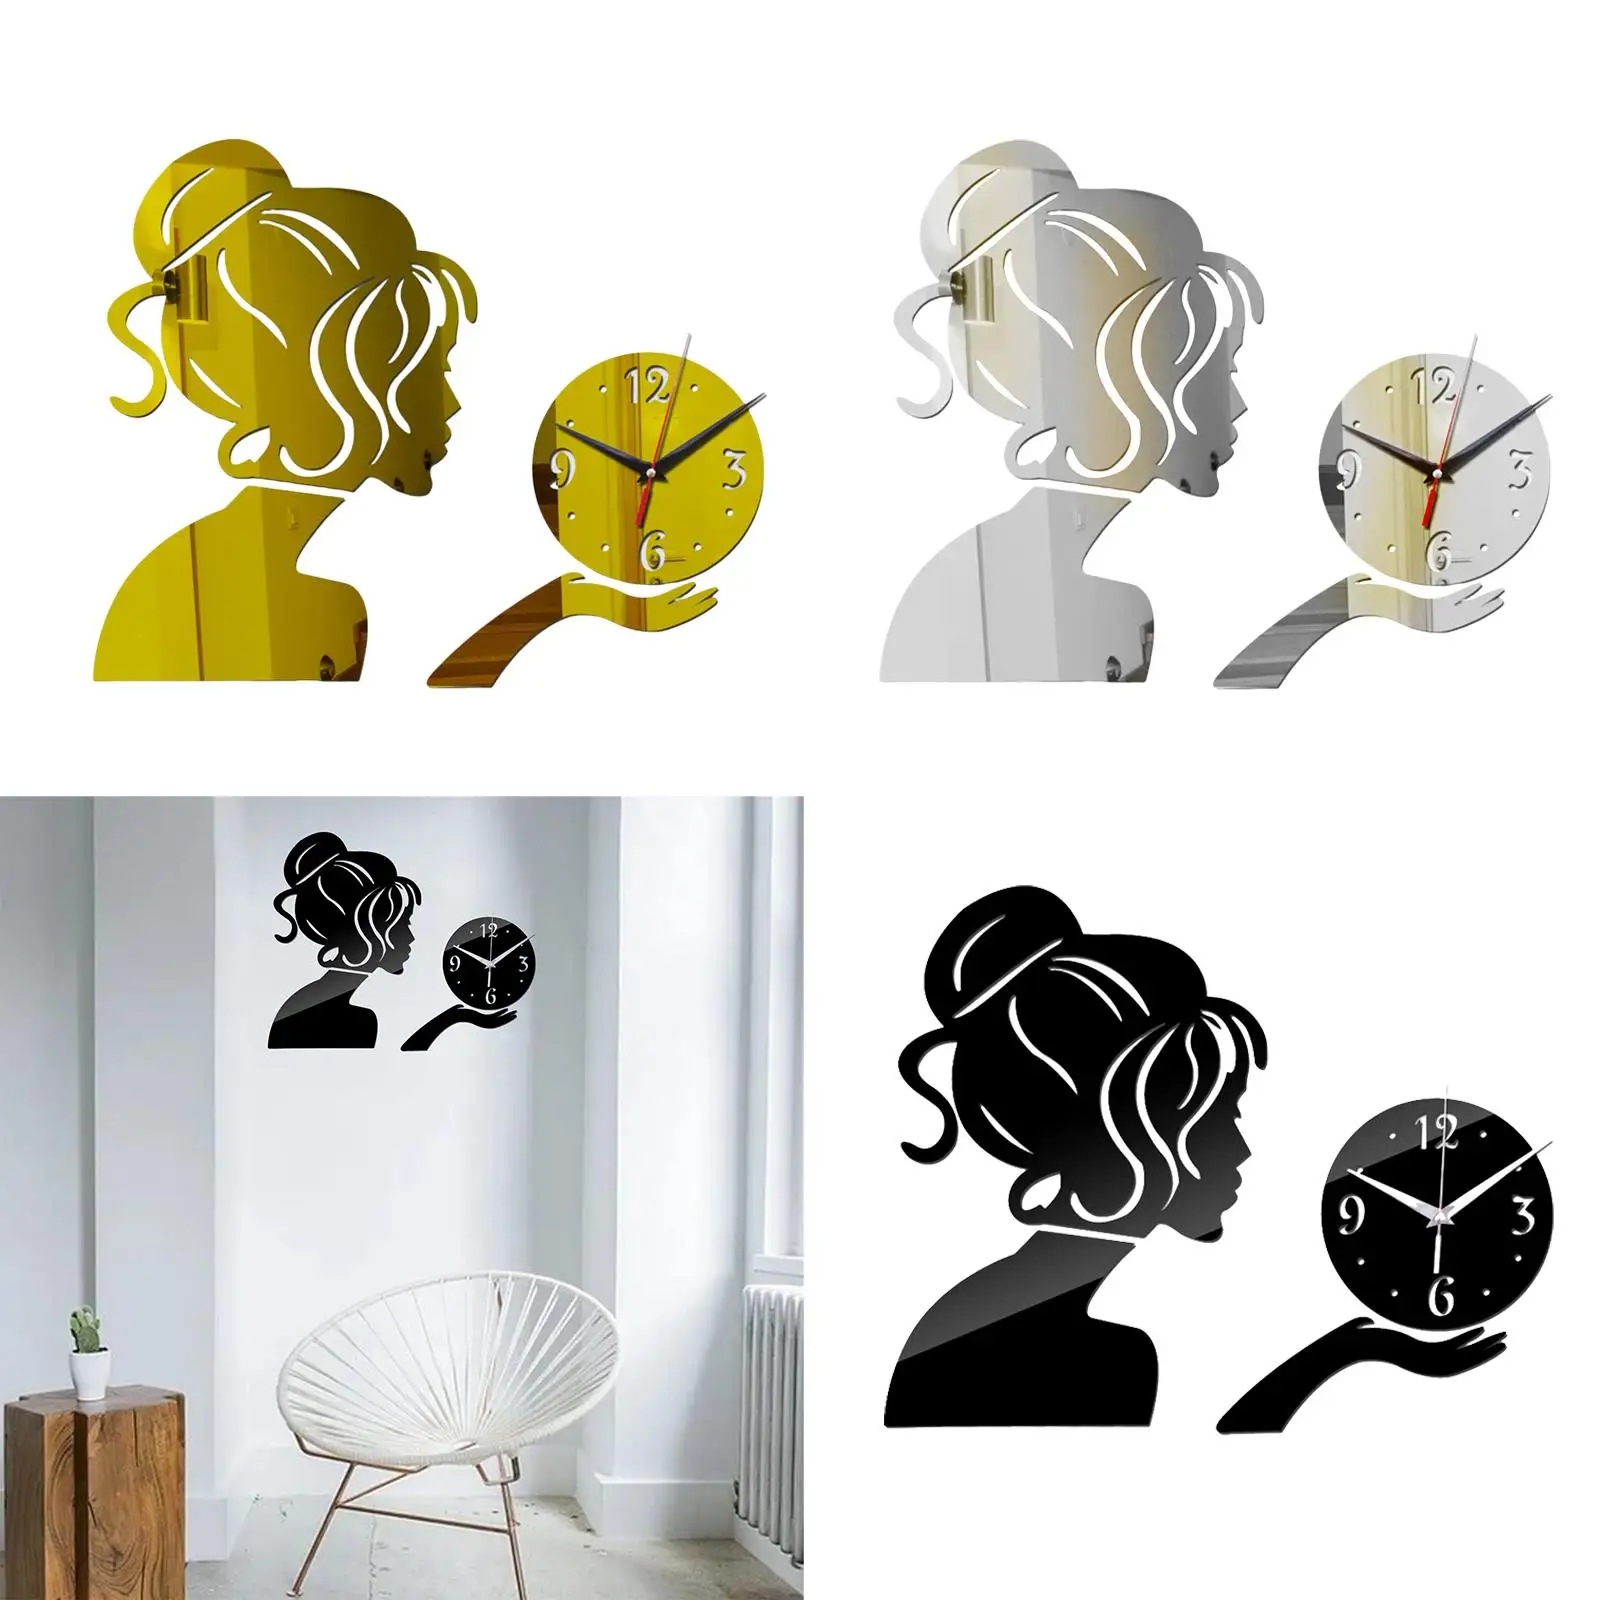 Wall Clock 3D DIY Sticker Beautiful Girl Decorative Stylish Silent Clock for Living Room Bedroom Dining Room Office Ornament